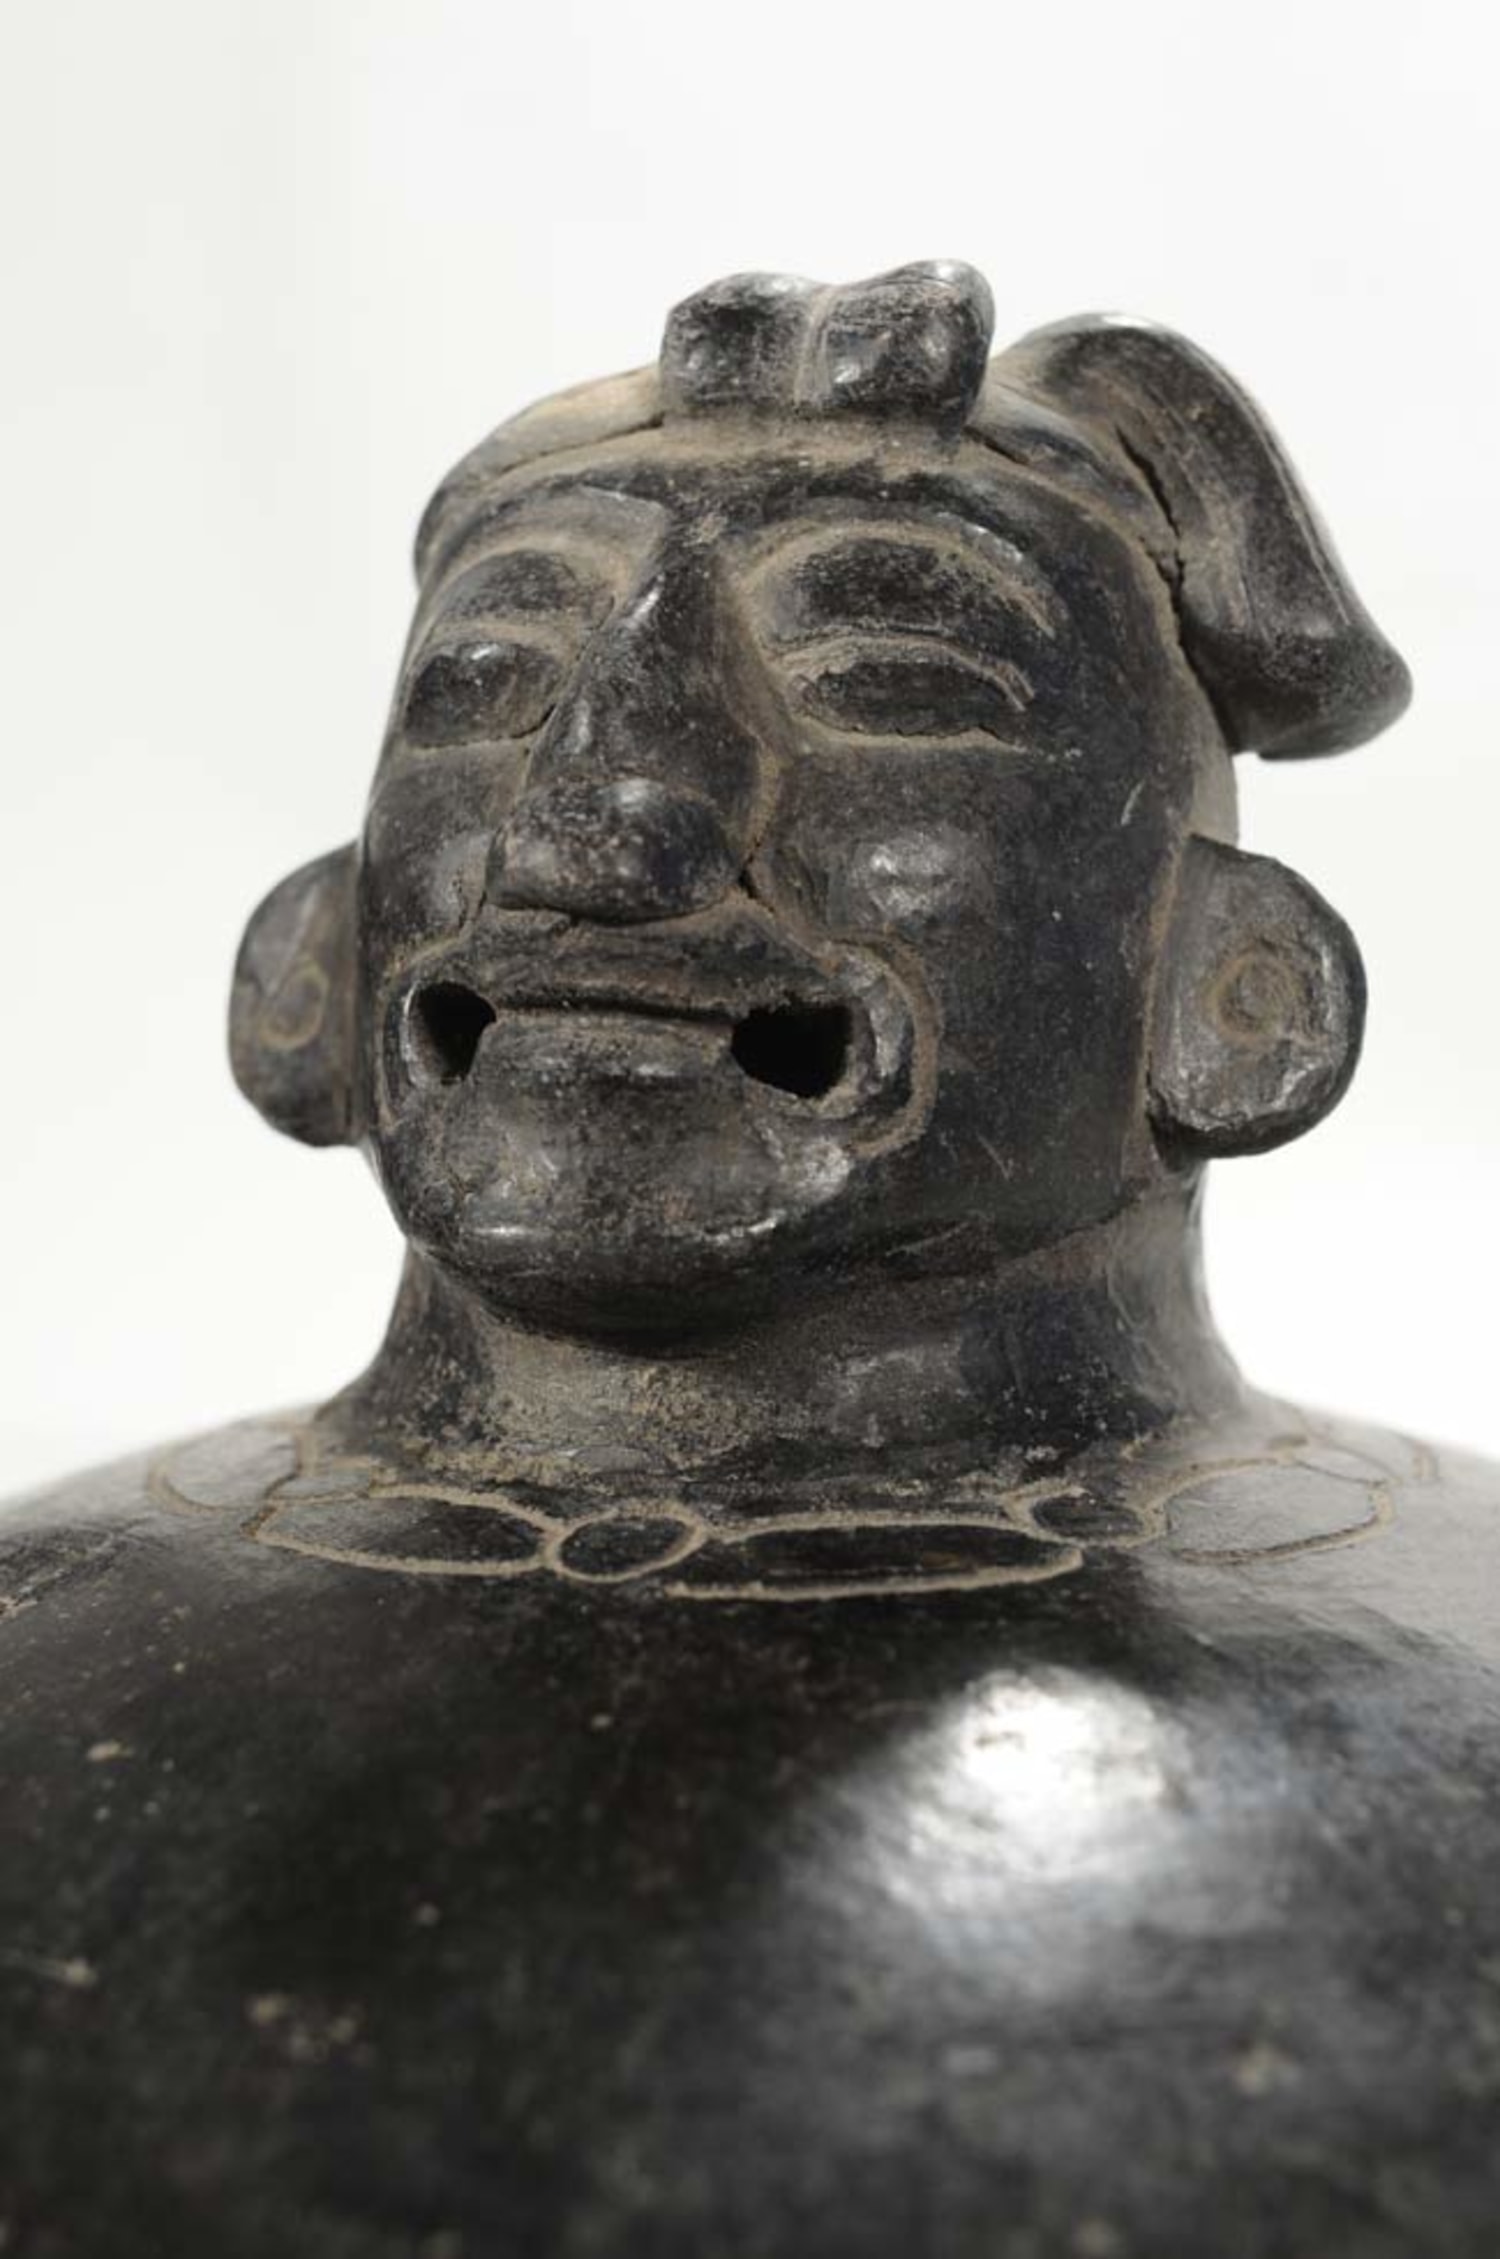 Tomb of ancient Mayan king discovered